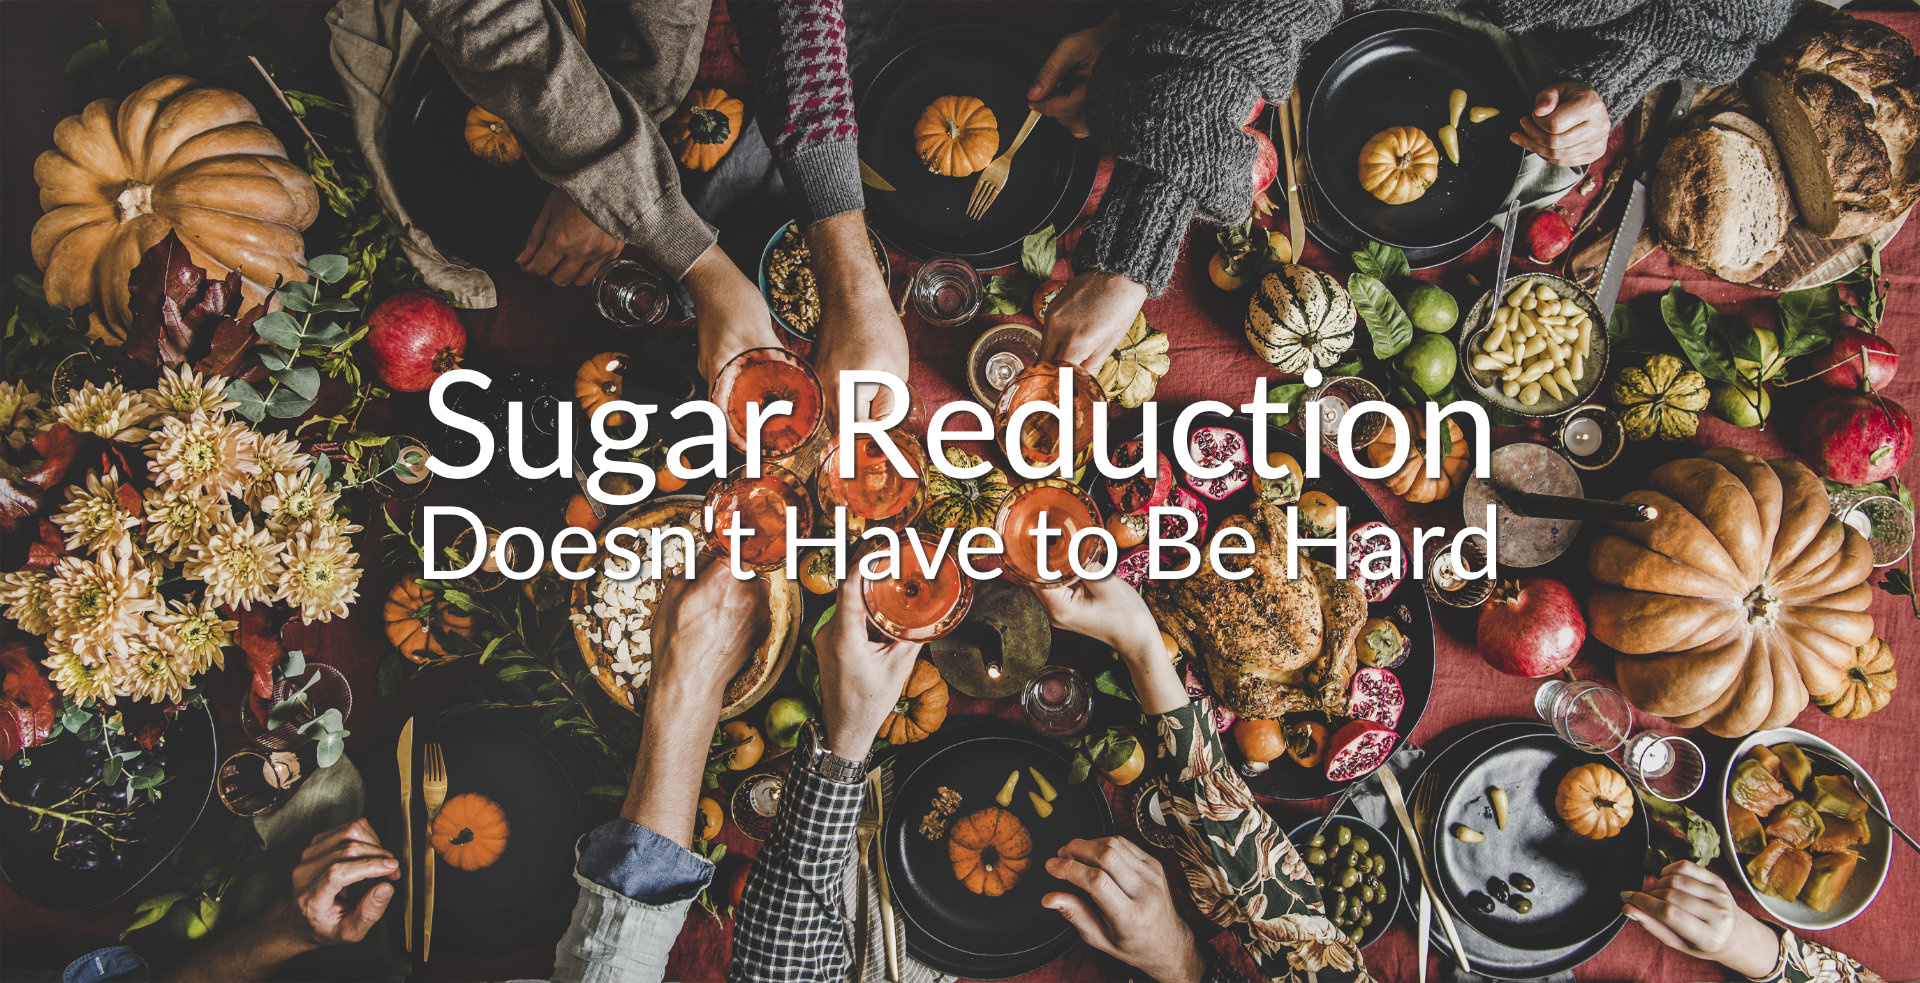 Sugar Reduction Doesn't Have to Be Hard